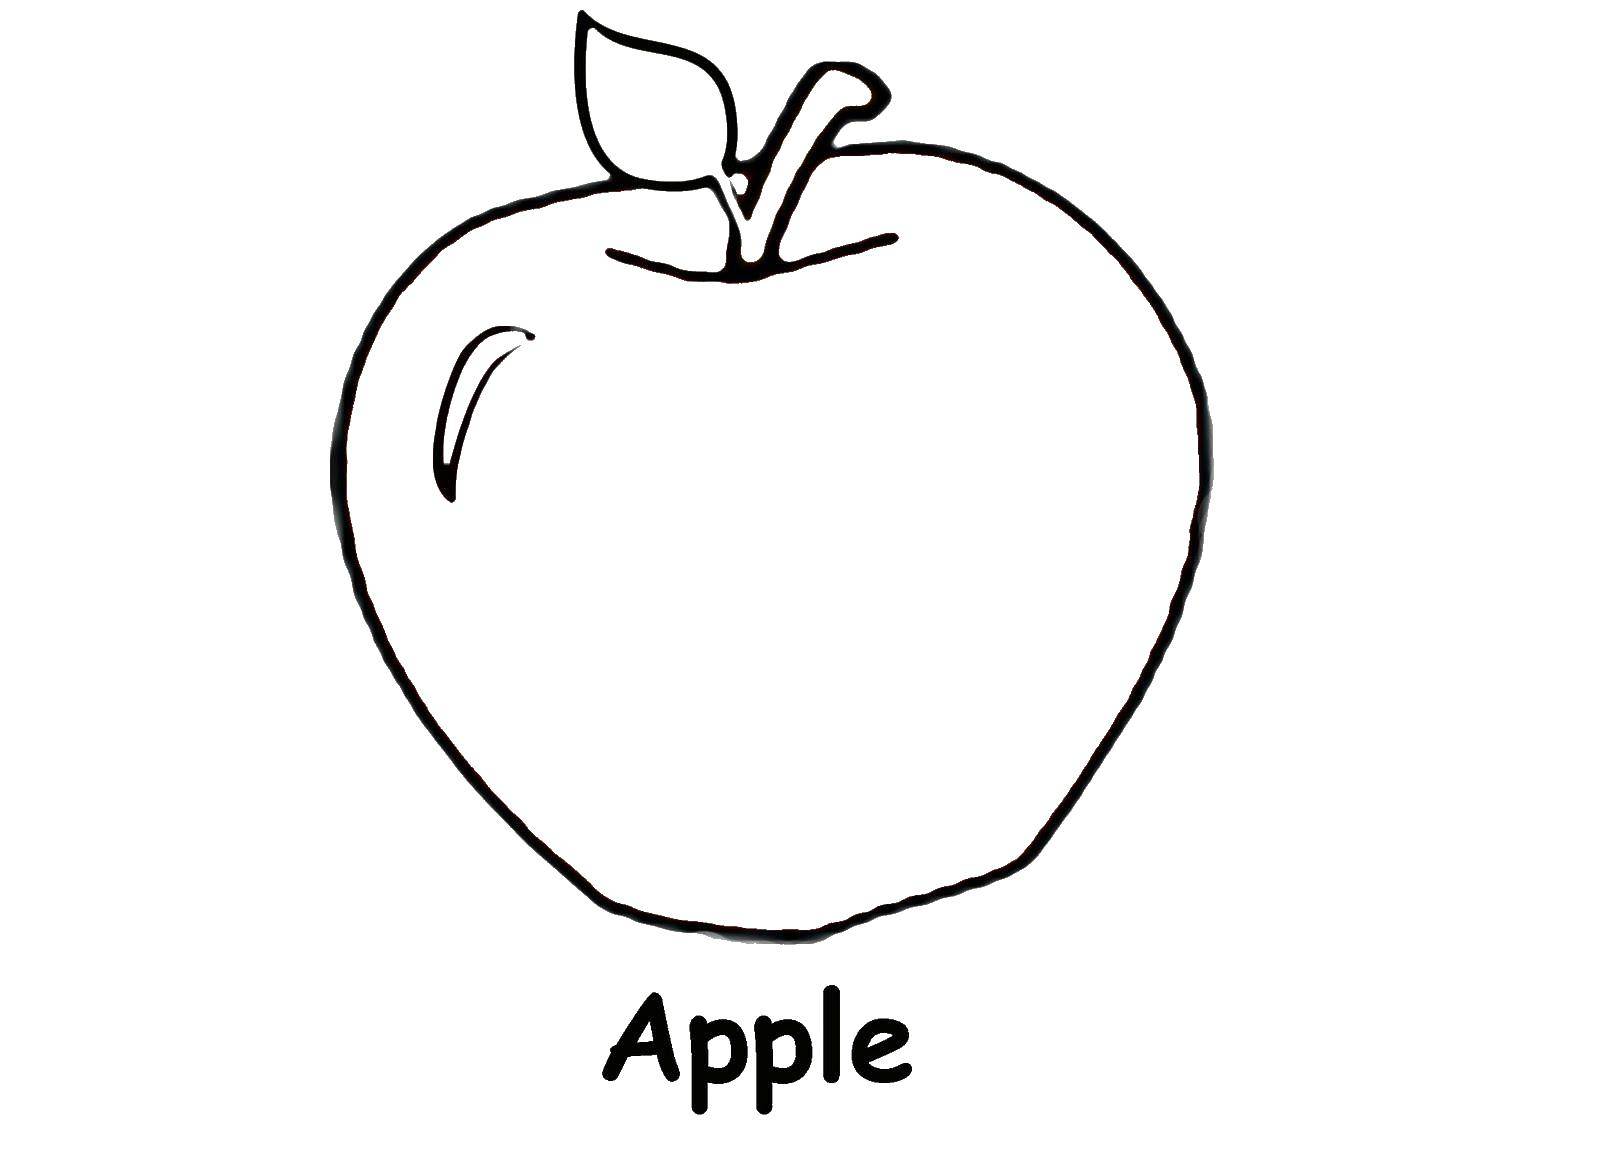 Coloring Apple. Category fruits. Tags:  fruit, apples, Apple.